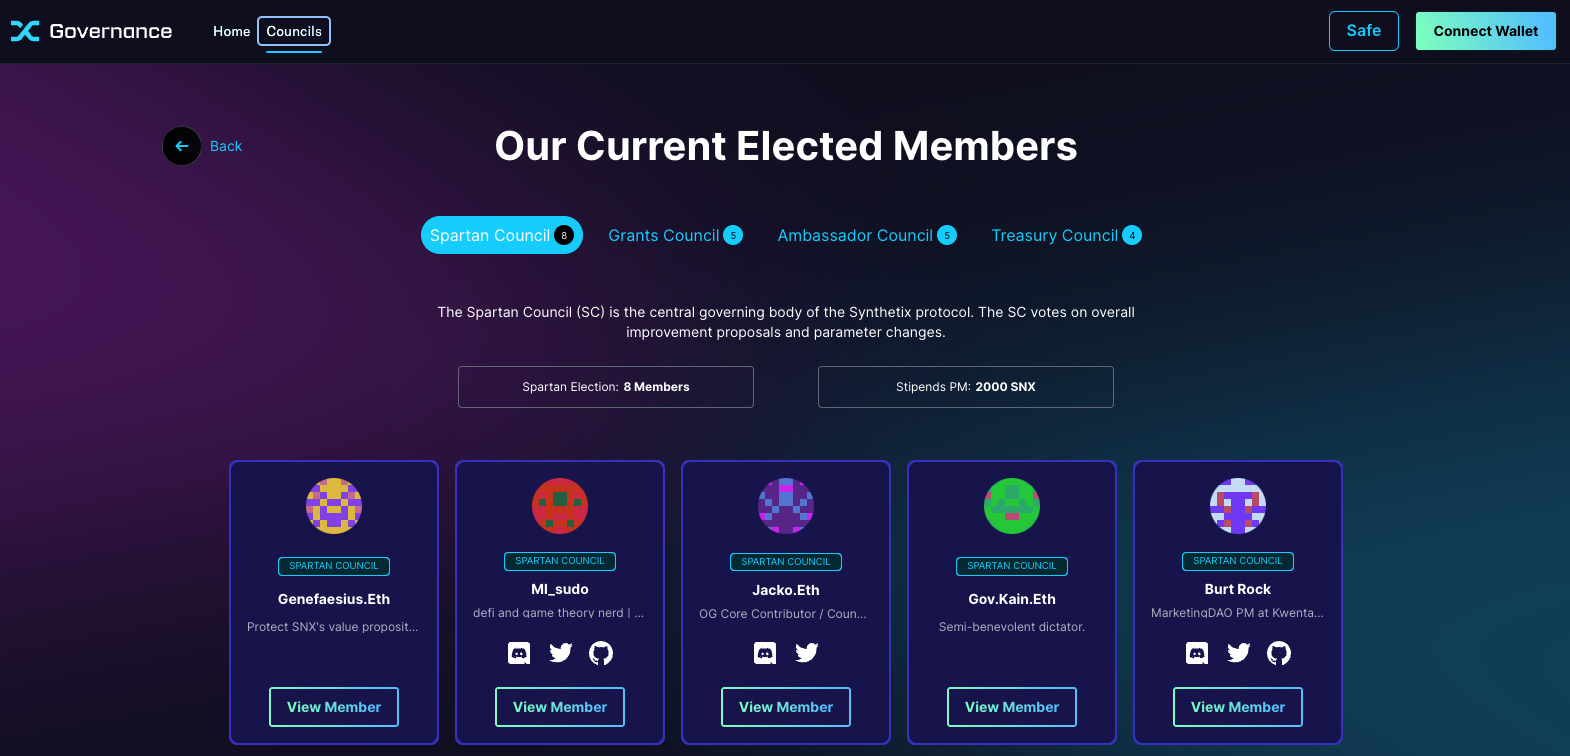 Member profiles empower Synthetix users in nominating council members.  